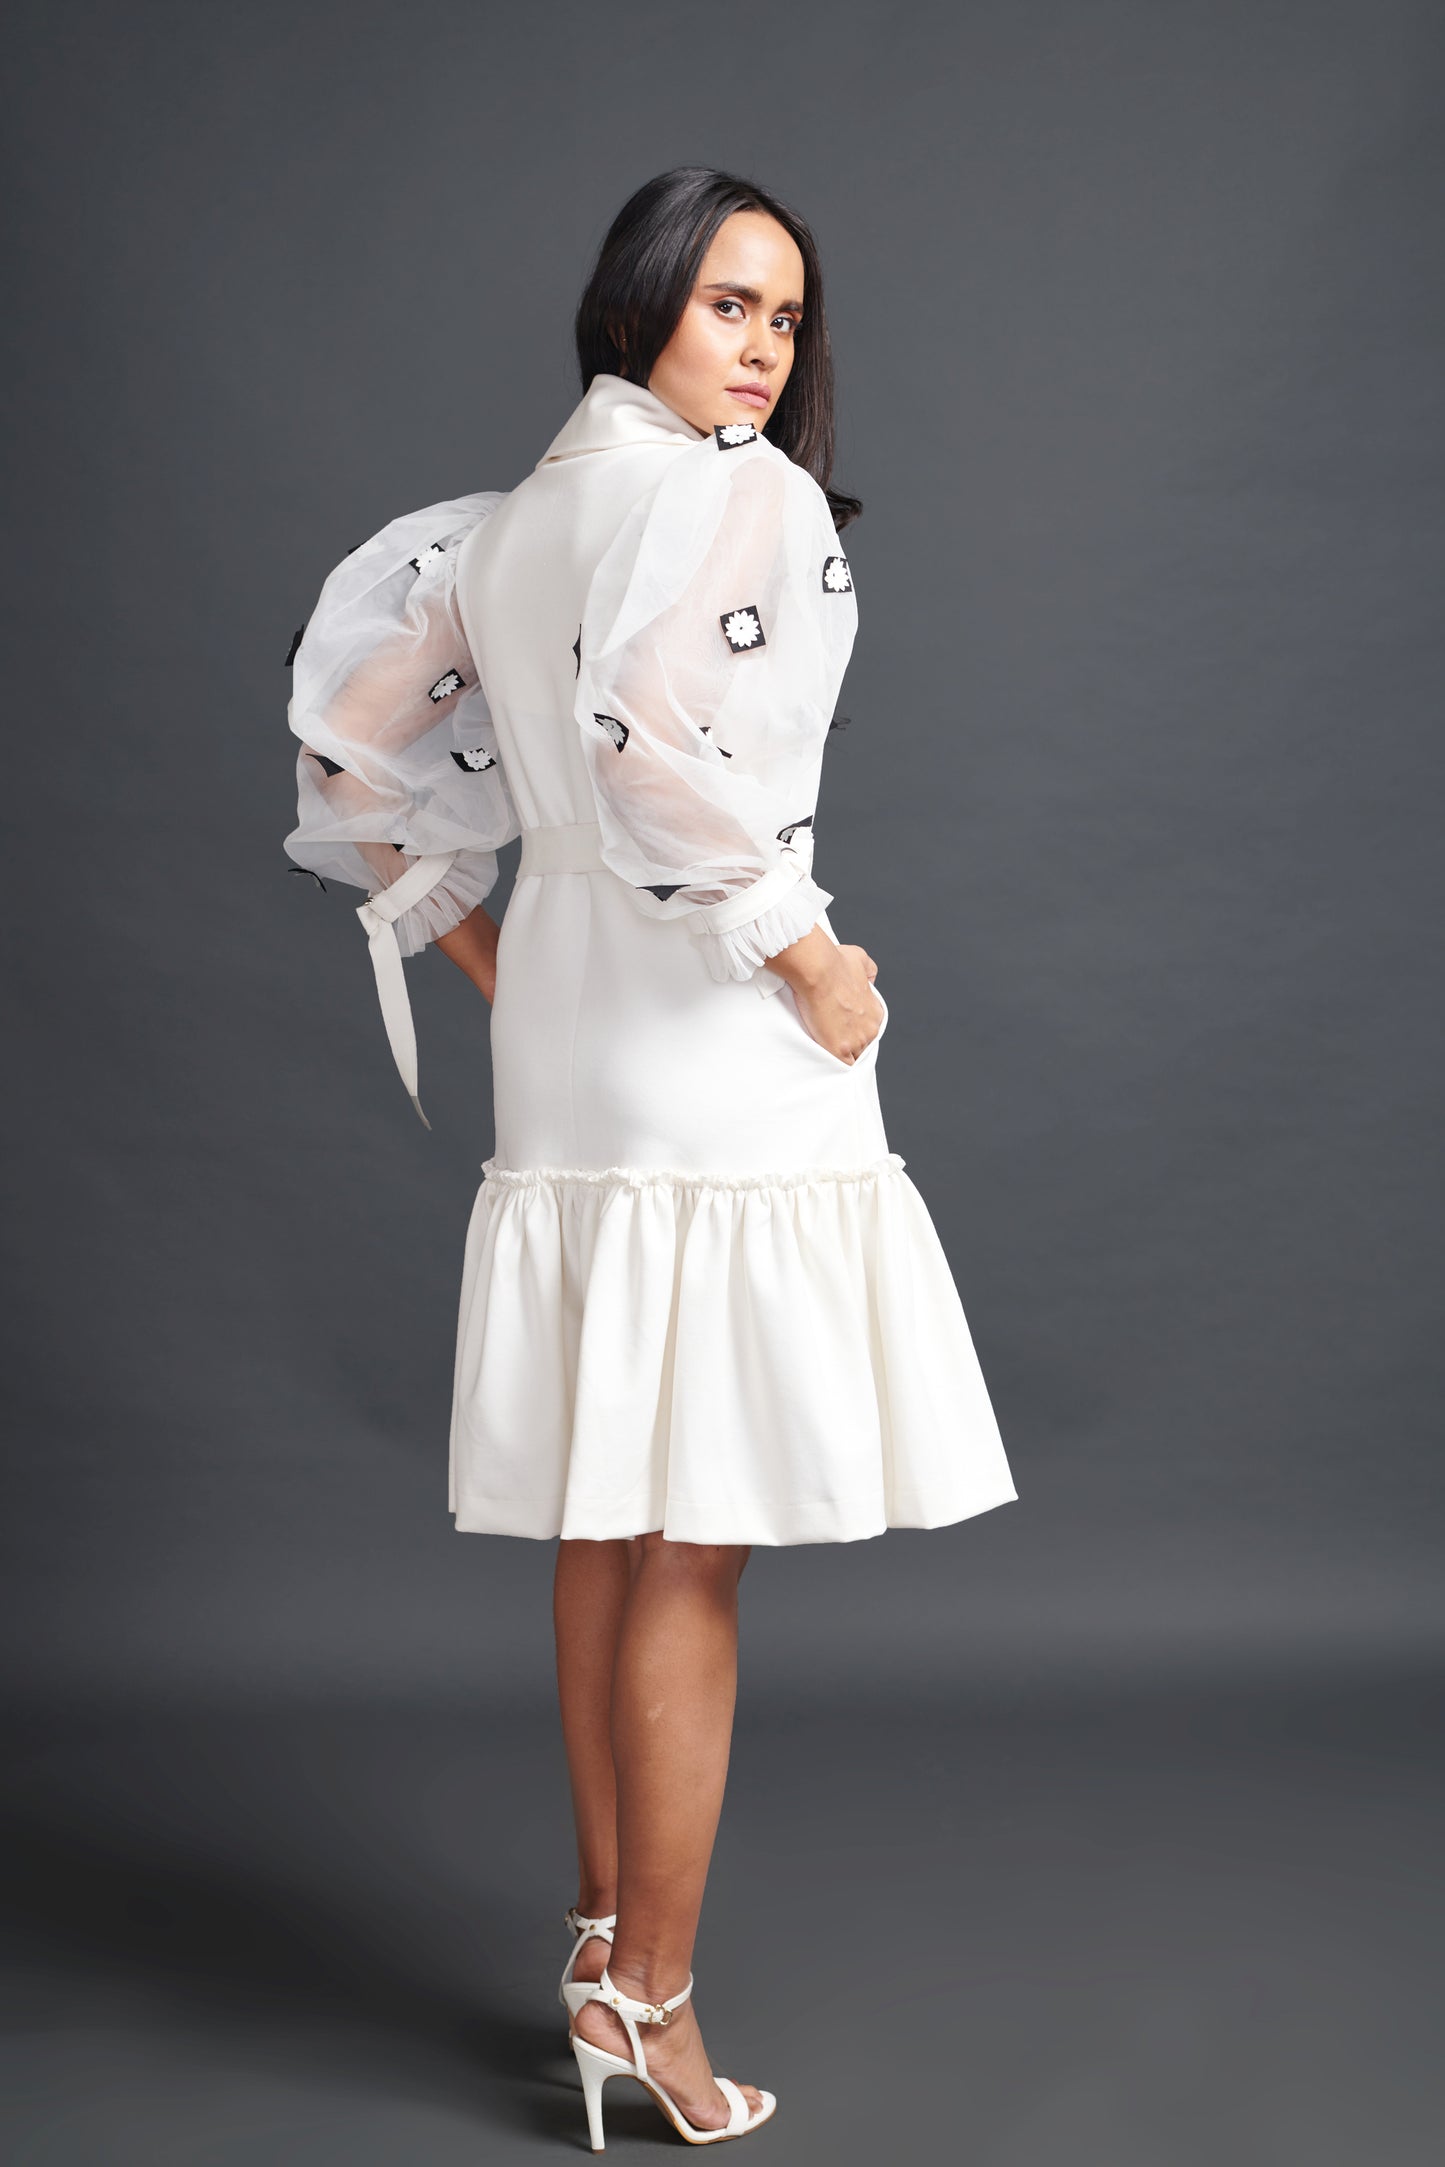 Image of WHITE JACKET DRESS WITH CUTWORK ON PUFFED SLEEVES. From savoirfashions.com